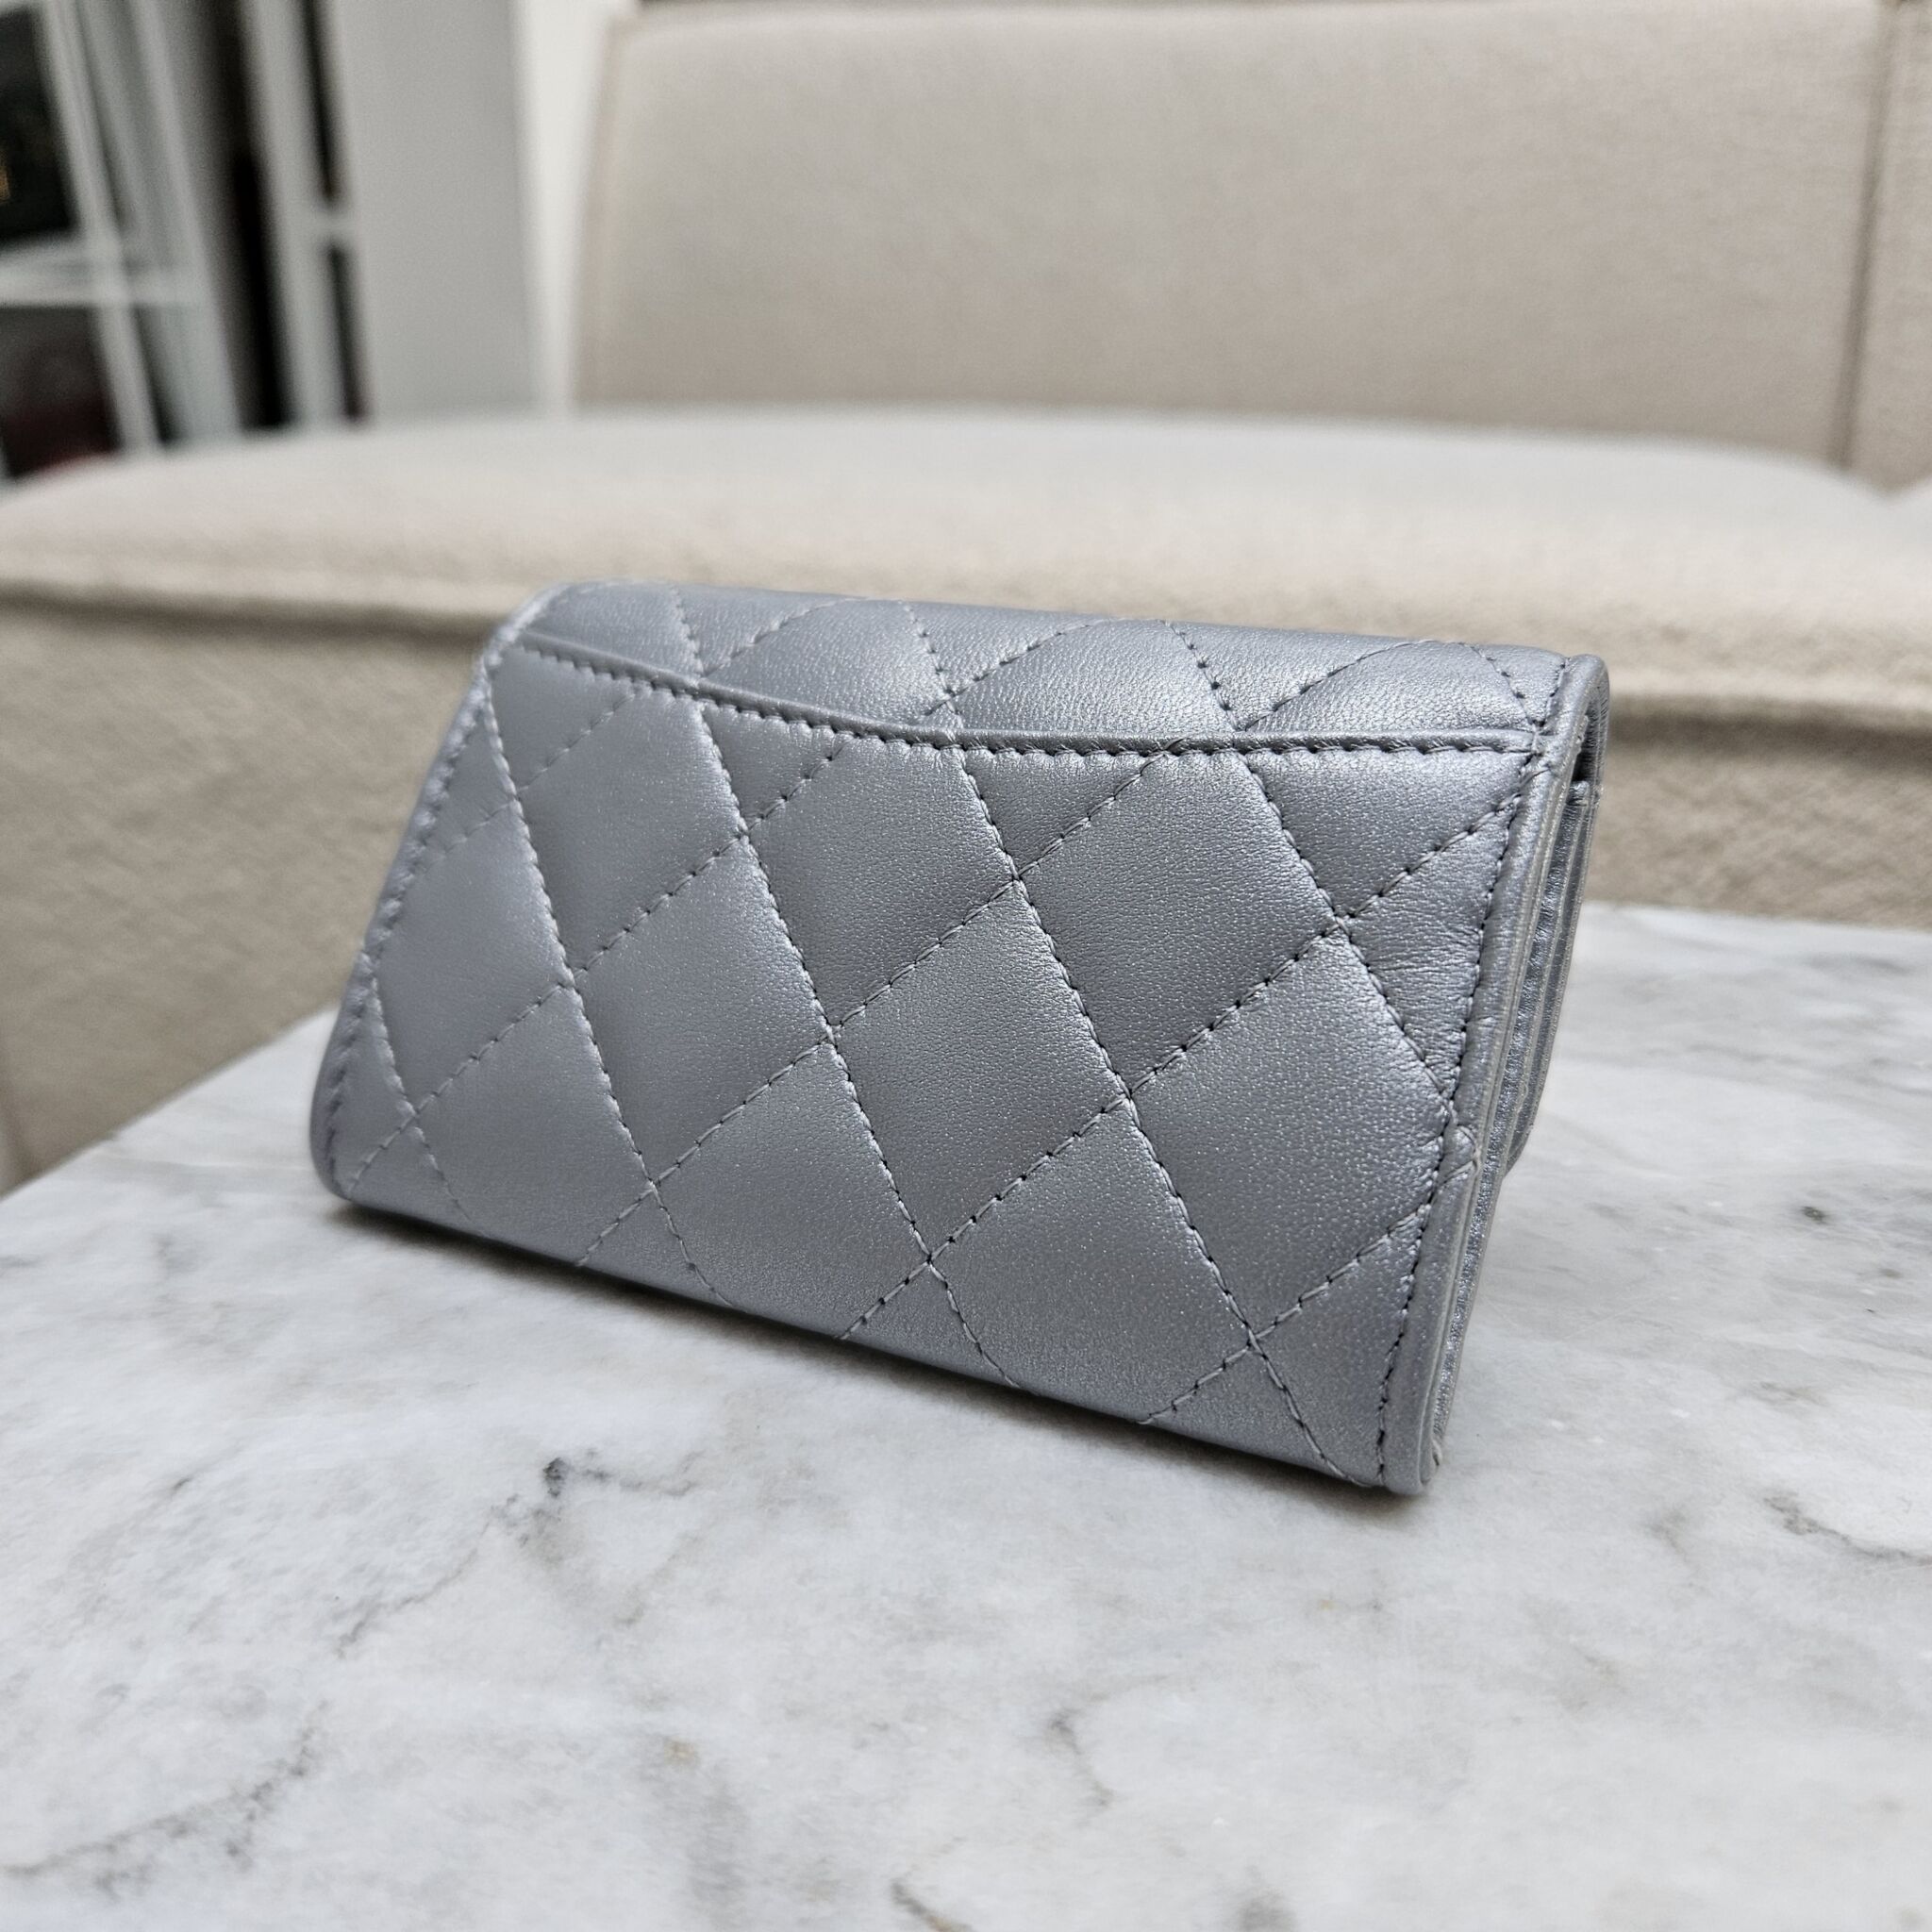 Unboxing Chanel Caviar Quilted Boy Card Holder So Black 